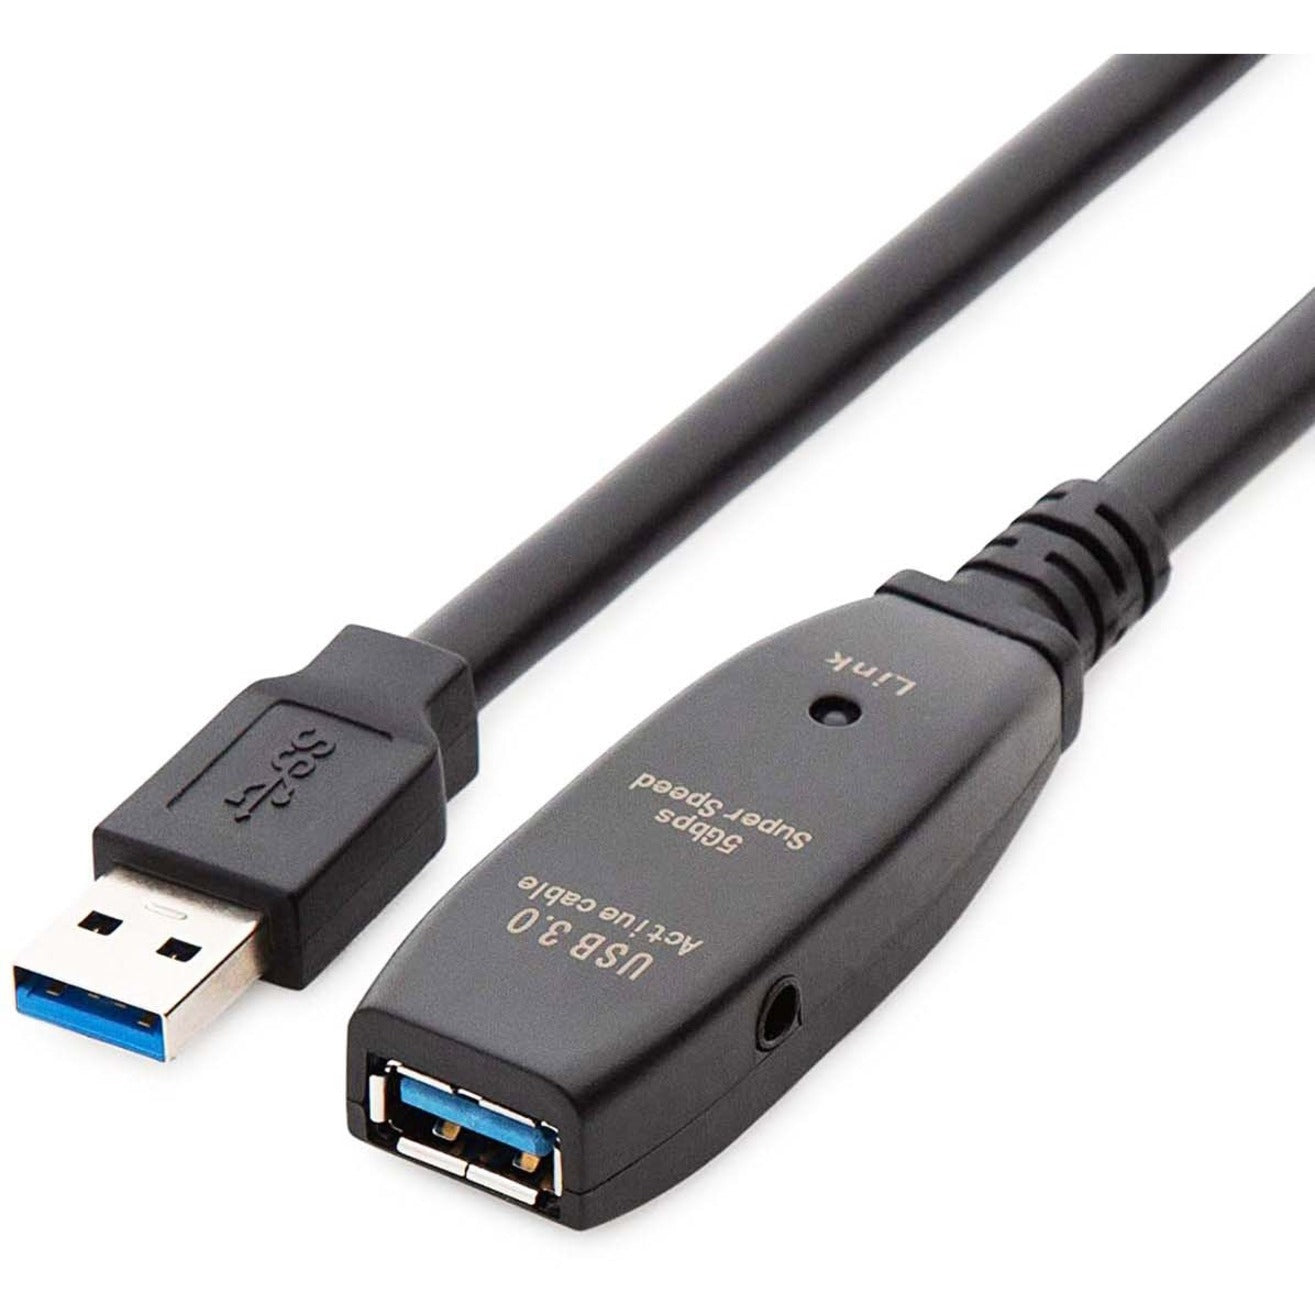 4XEM 4X3302A225M 25M Active USB 3.0 DC Power Input Extension Cable, Plug & Play, Signal Booster